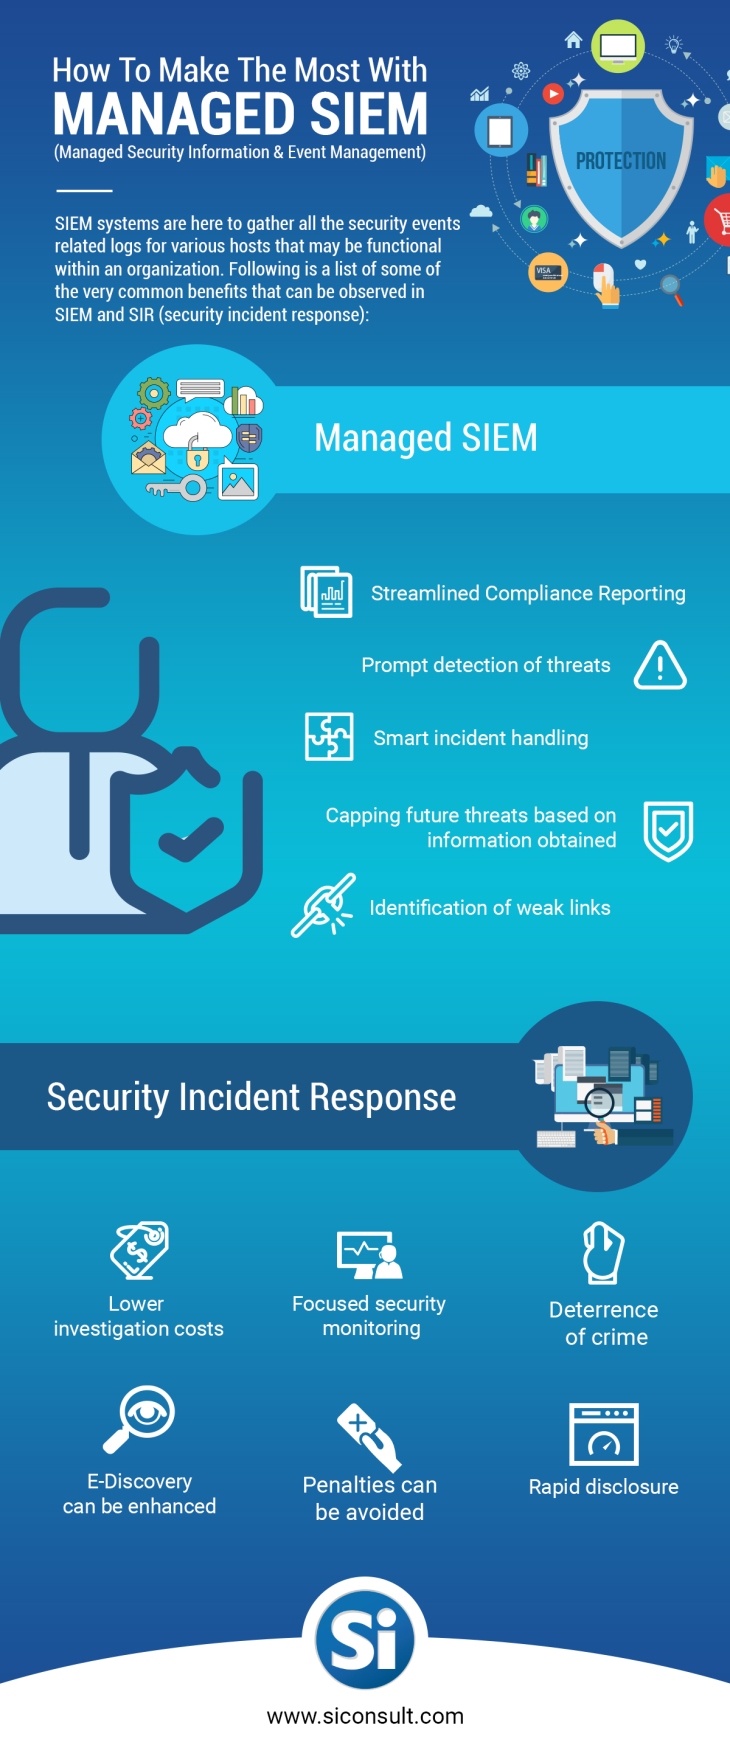 Managed SIEM and Security Incident Response